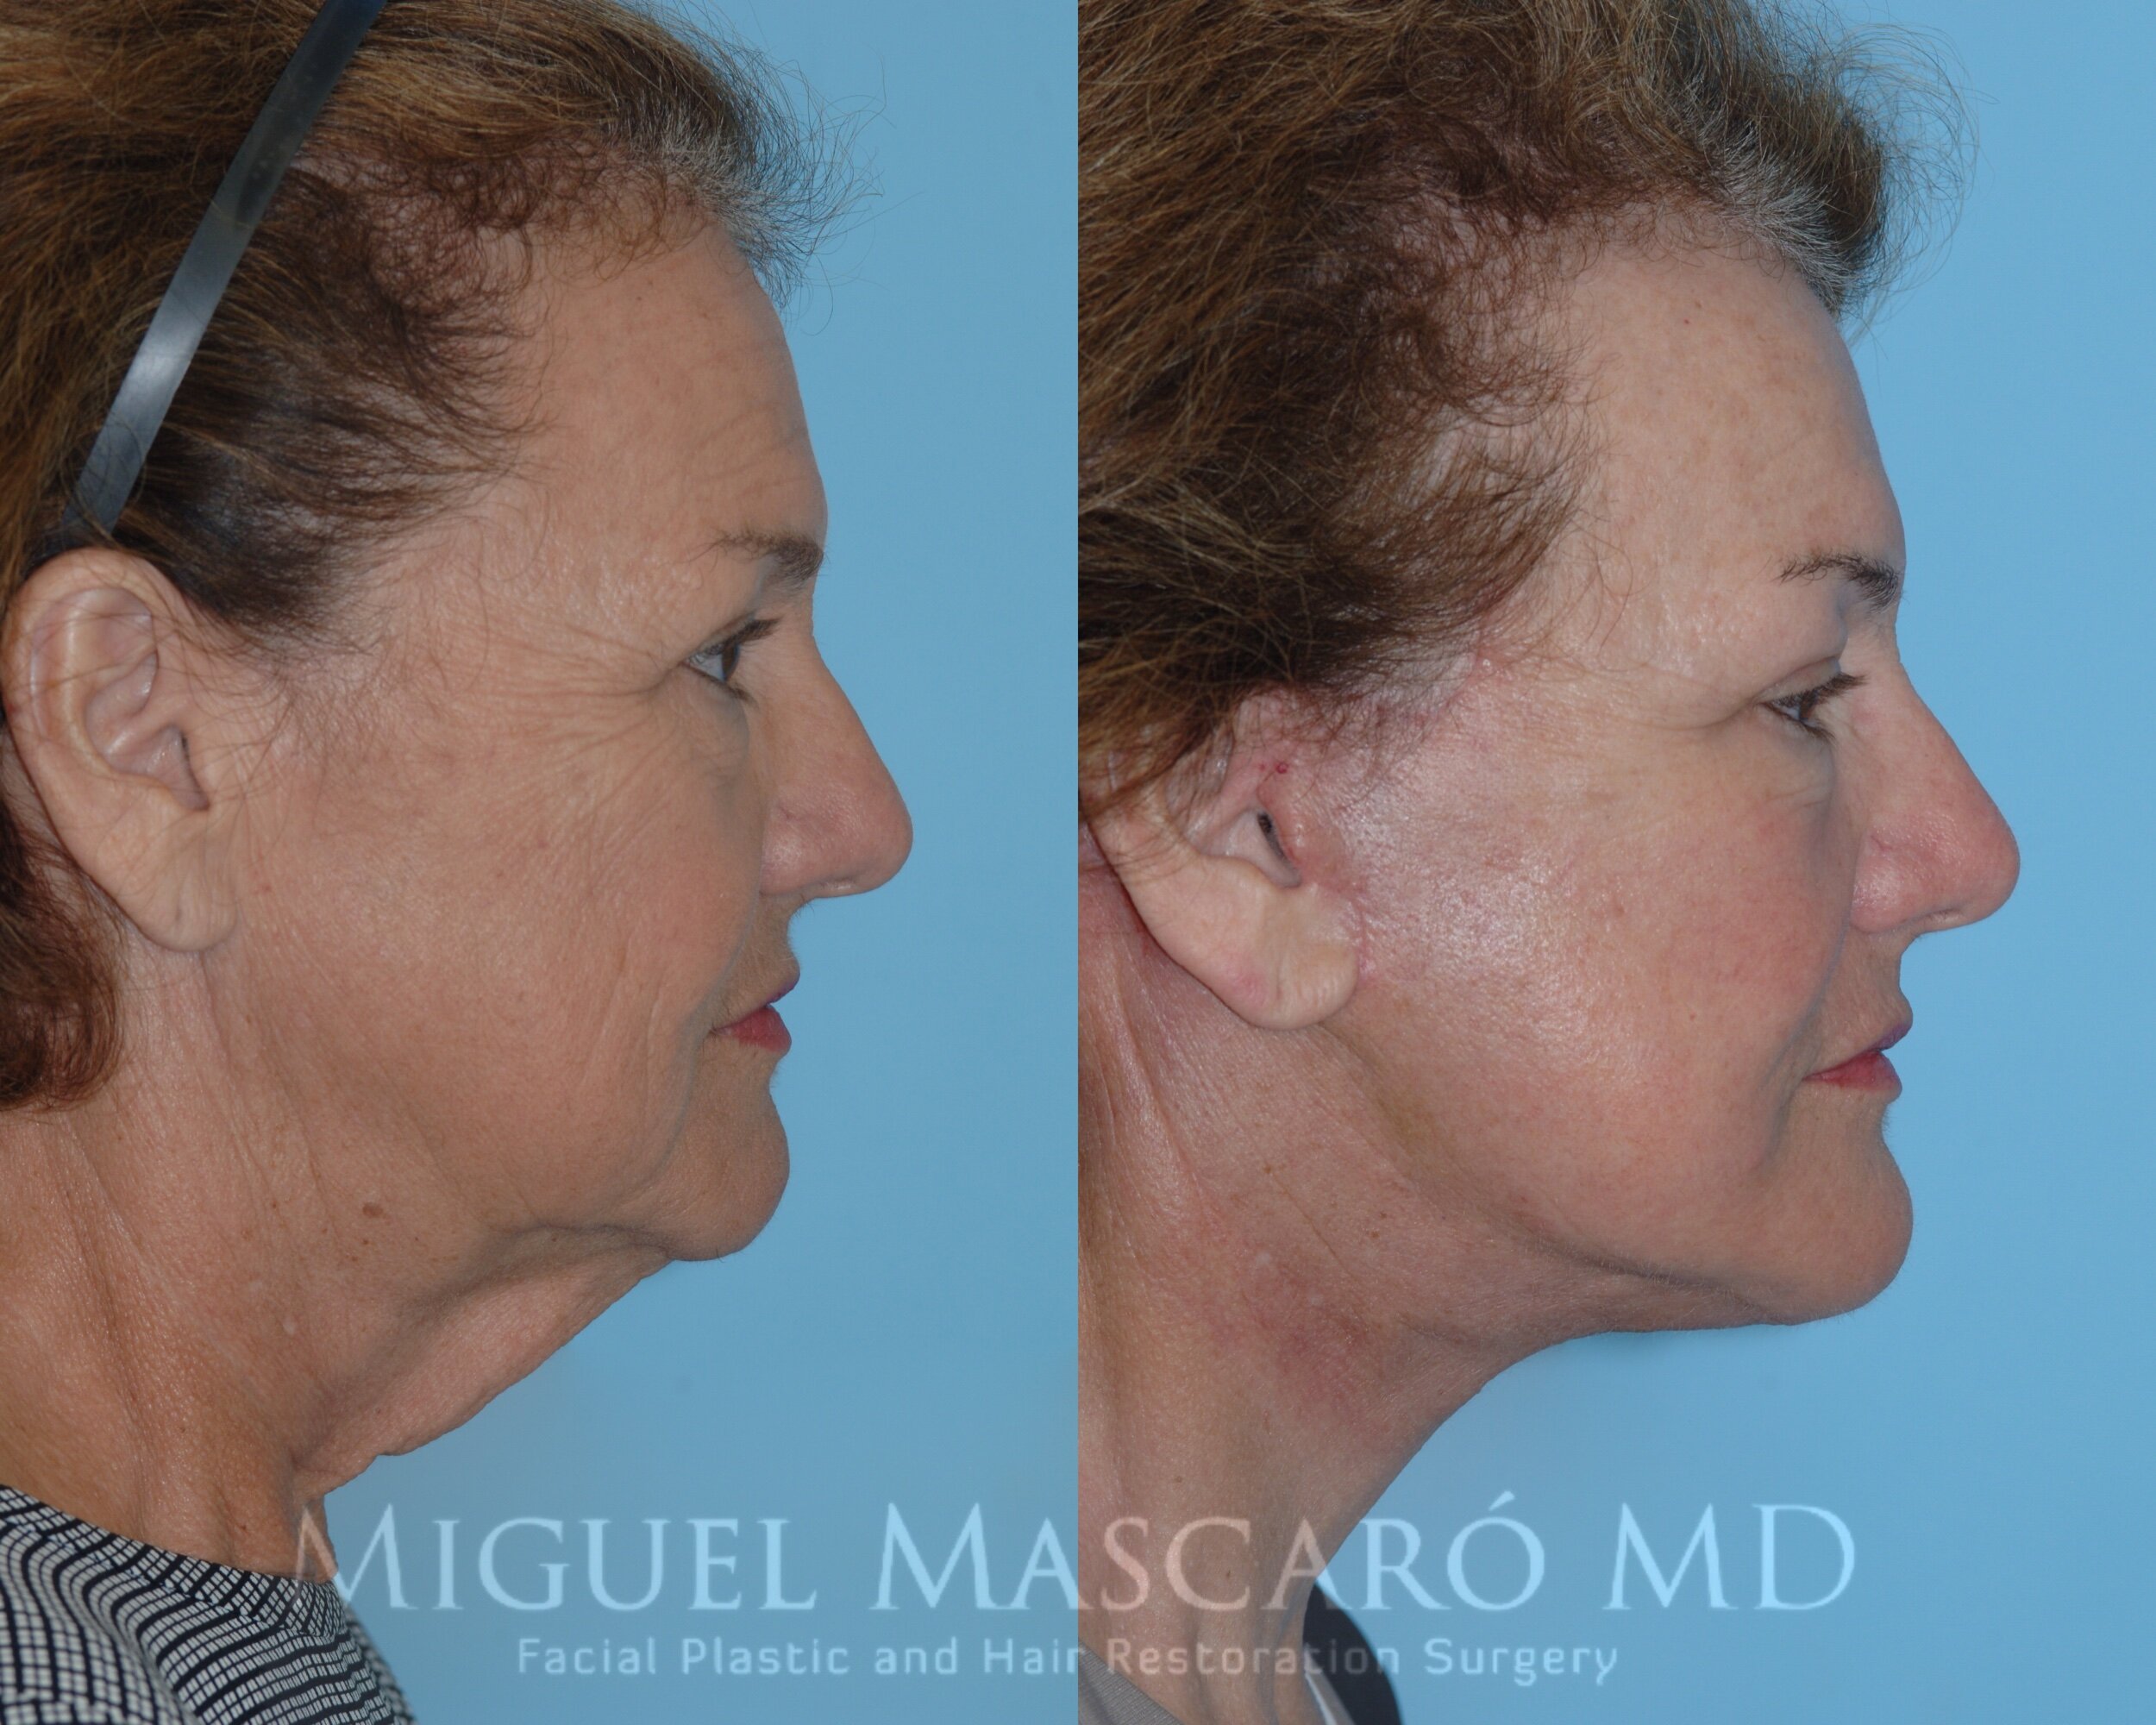  Deep plane face and neck lift  